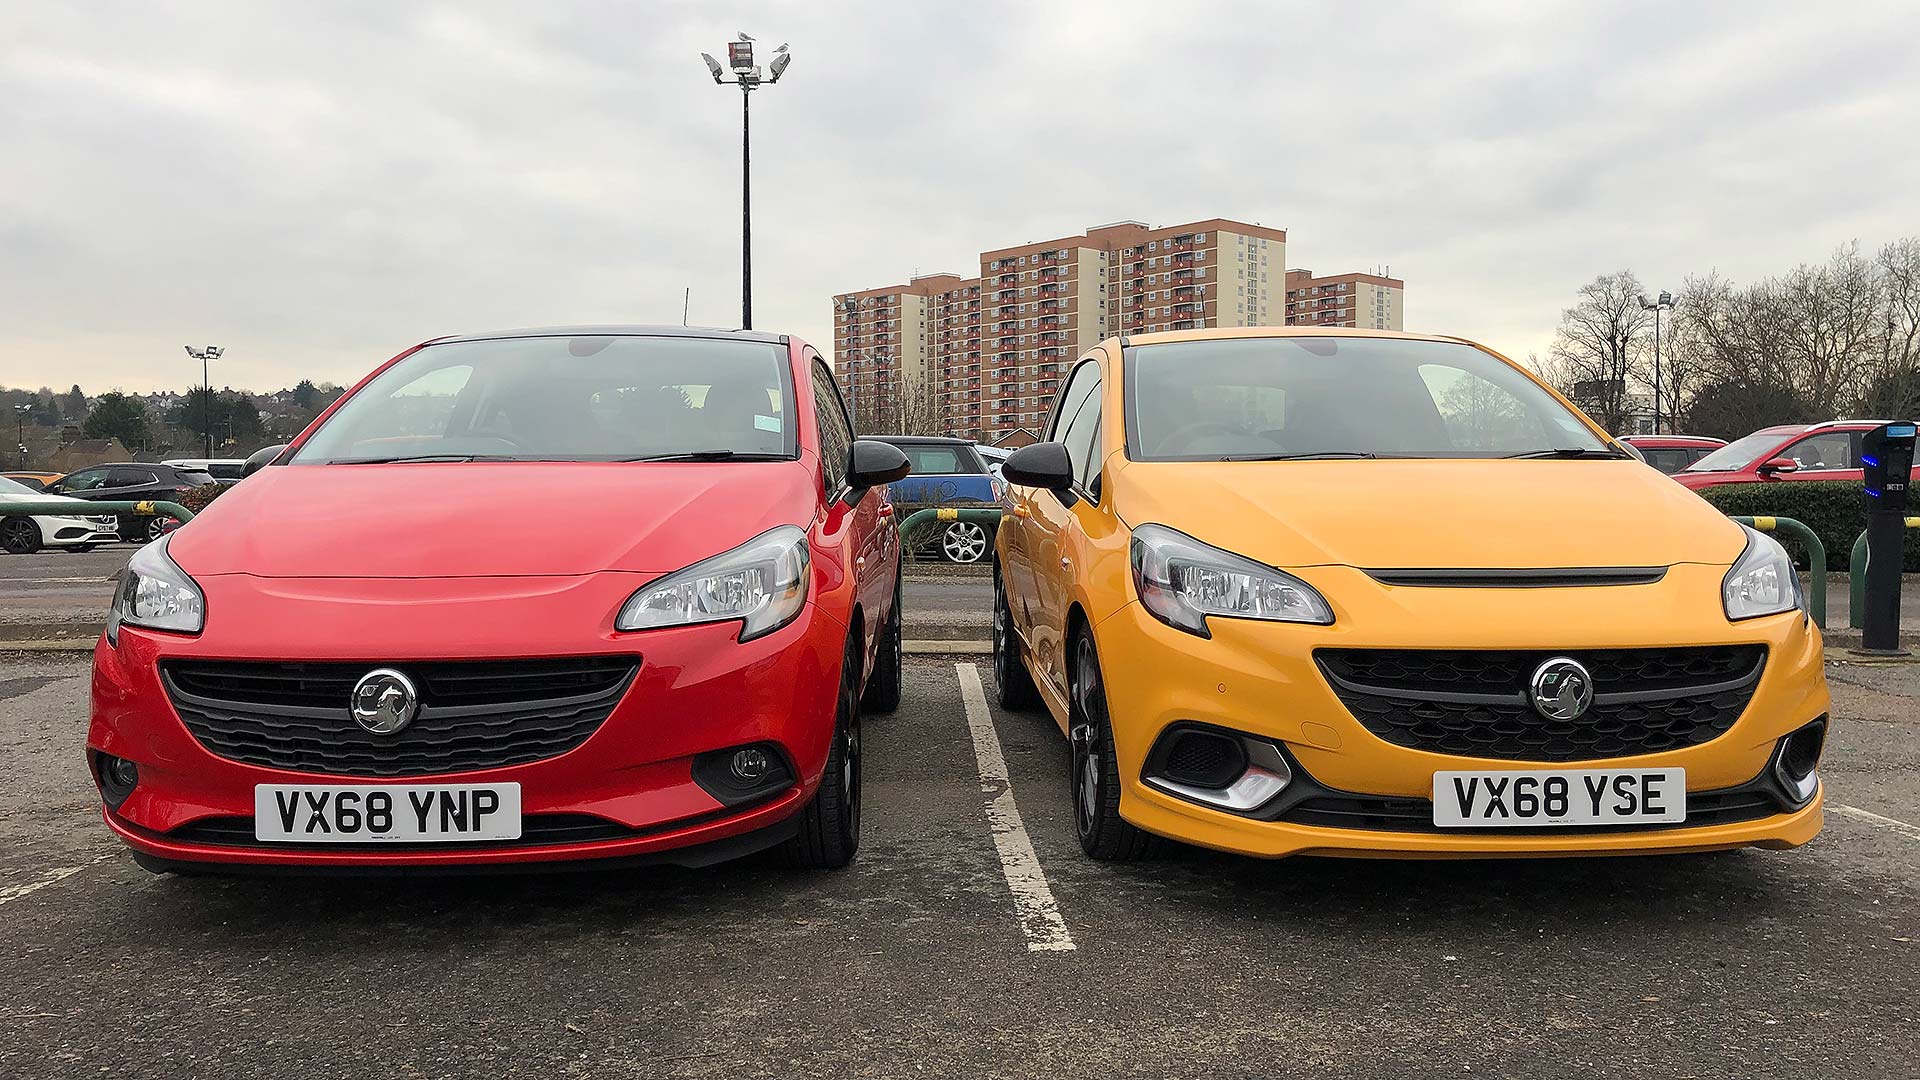 Vauxhall Corsa Griffin Edition and Corsa GSi